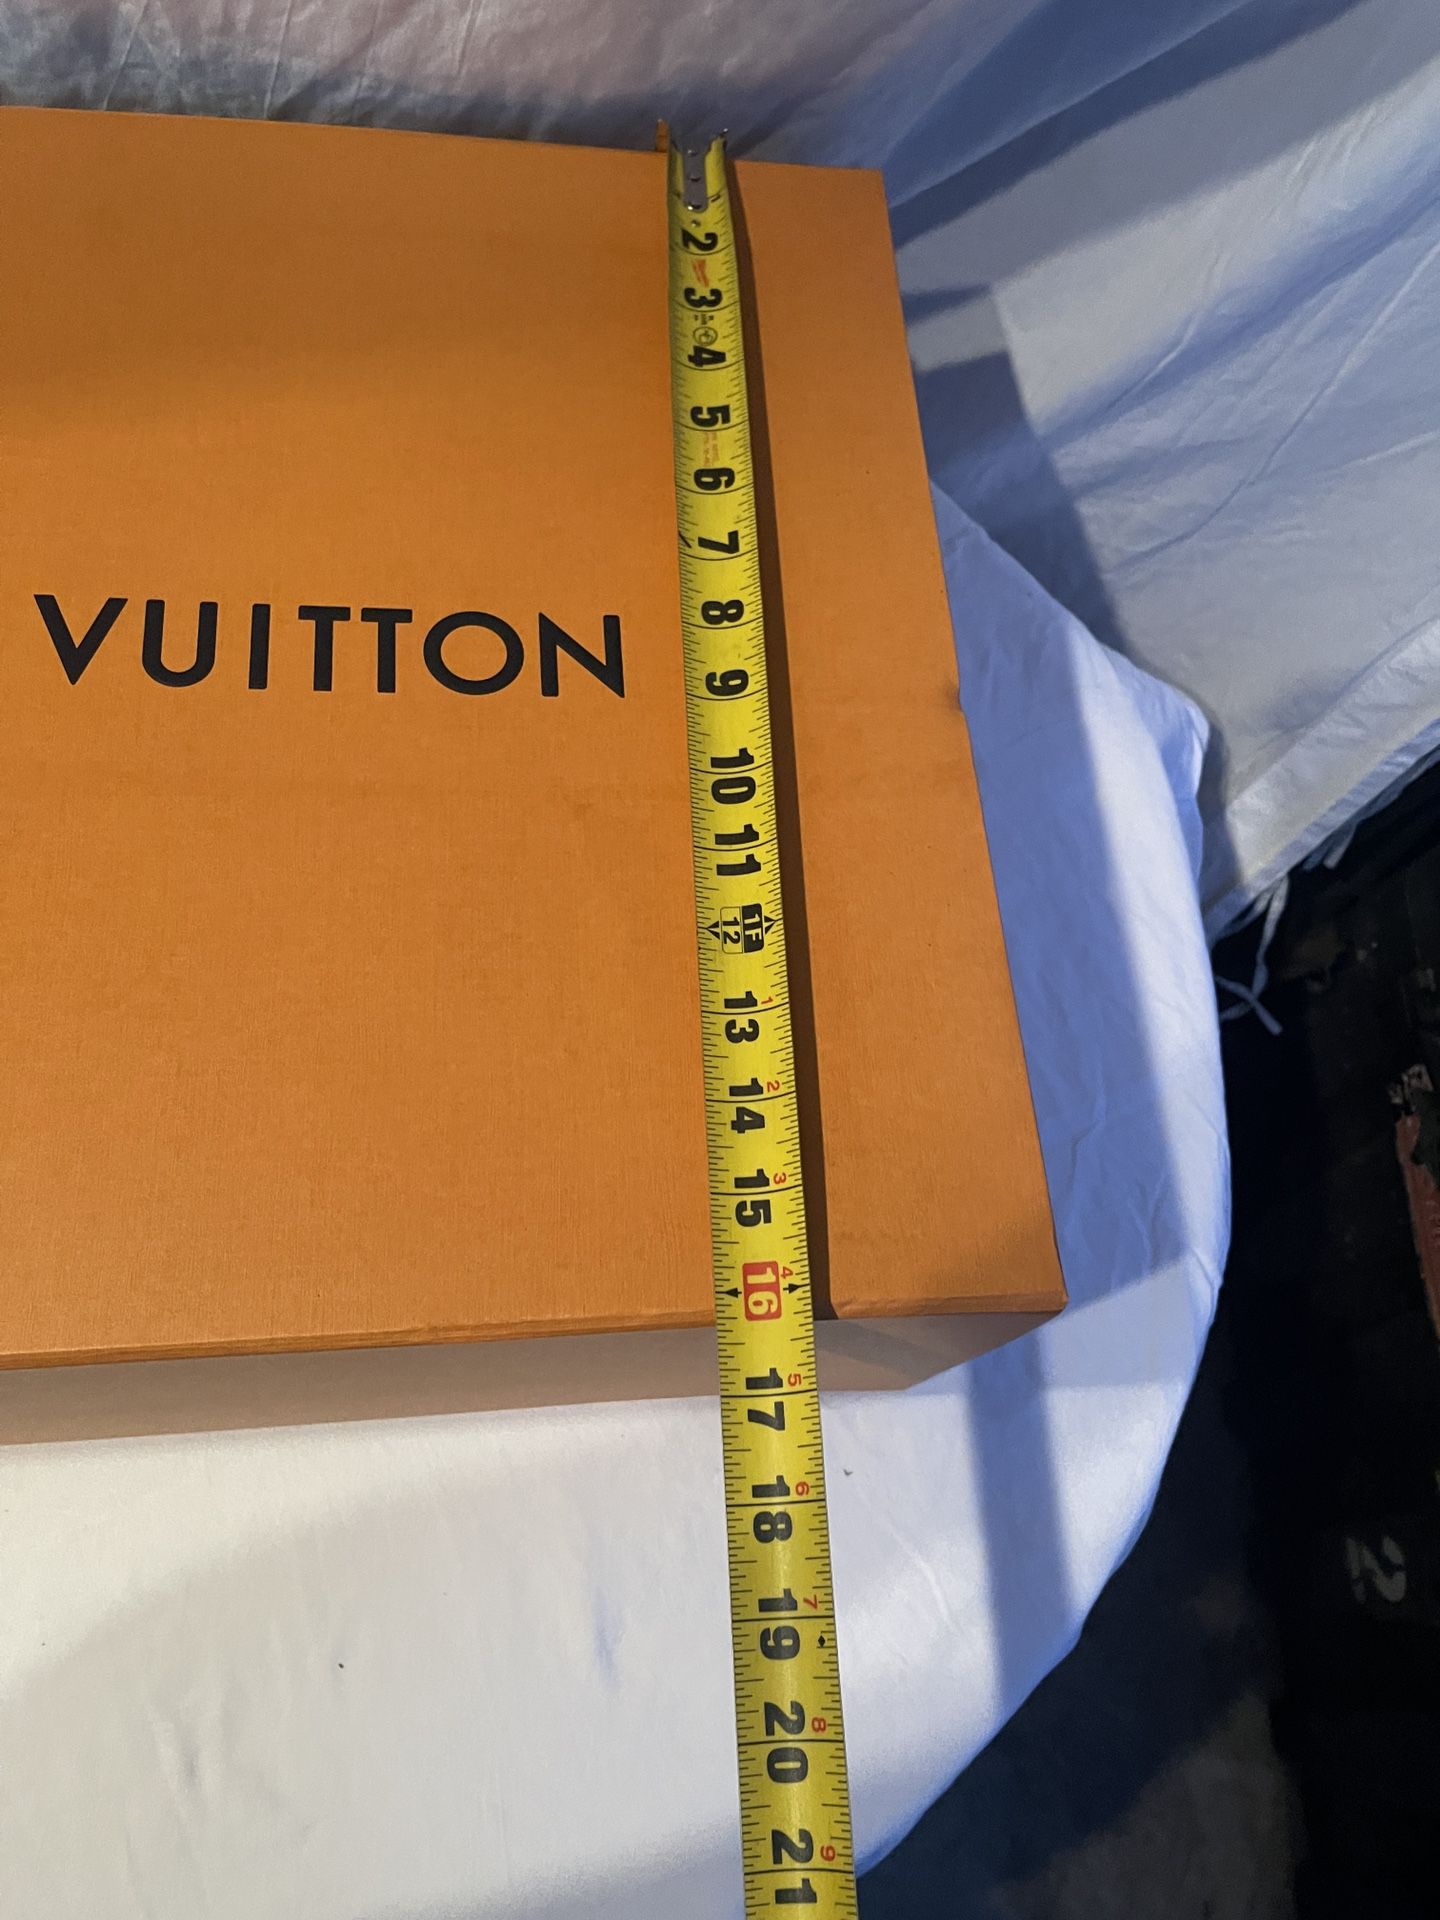 Louis Vuitton shoe box With Magnetic Flap for Sale in Oakland, CA - OfferUp